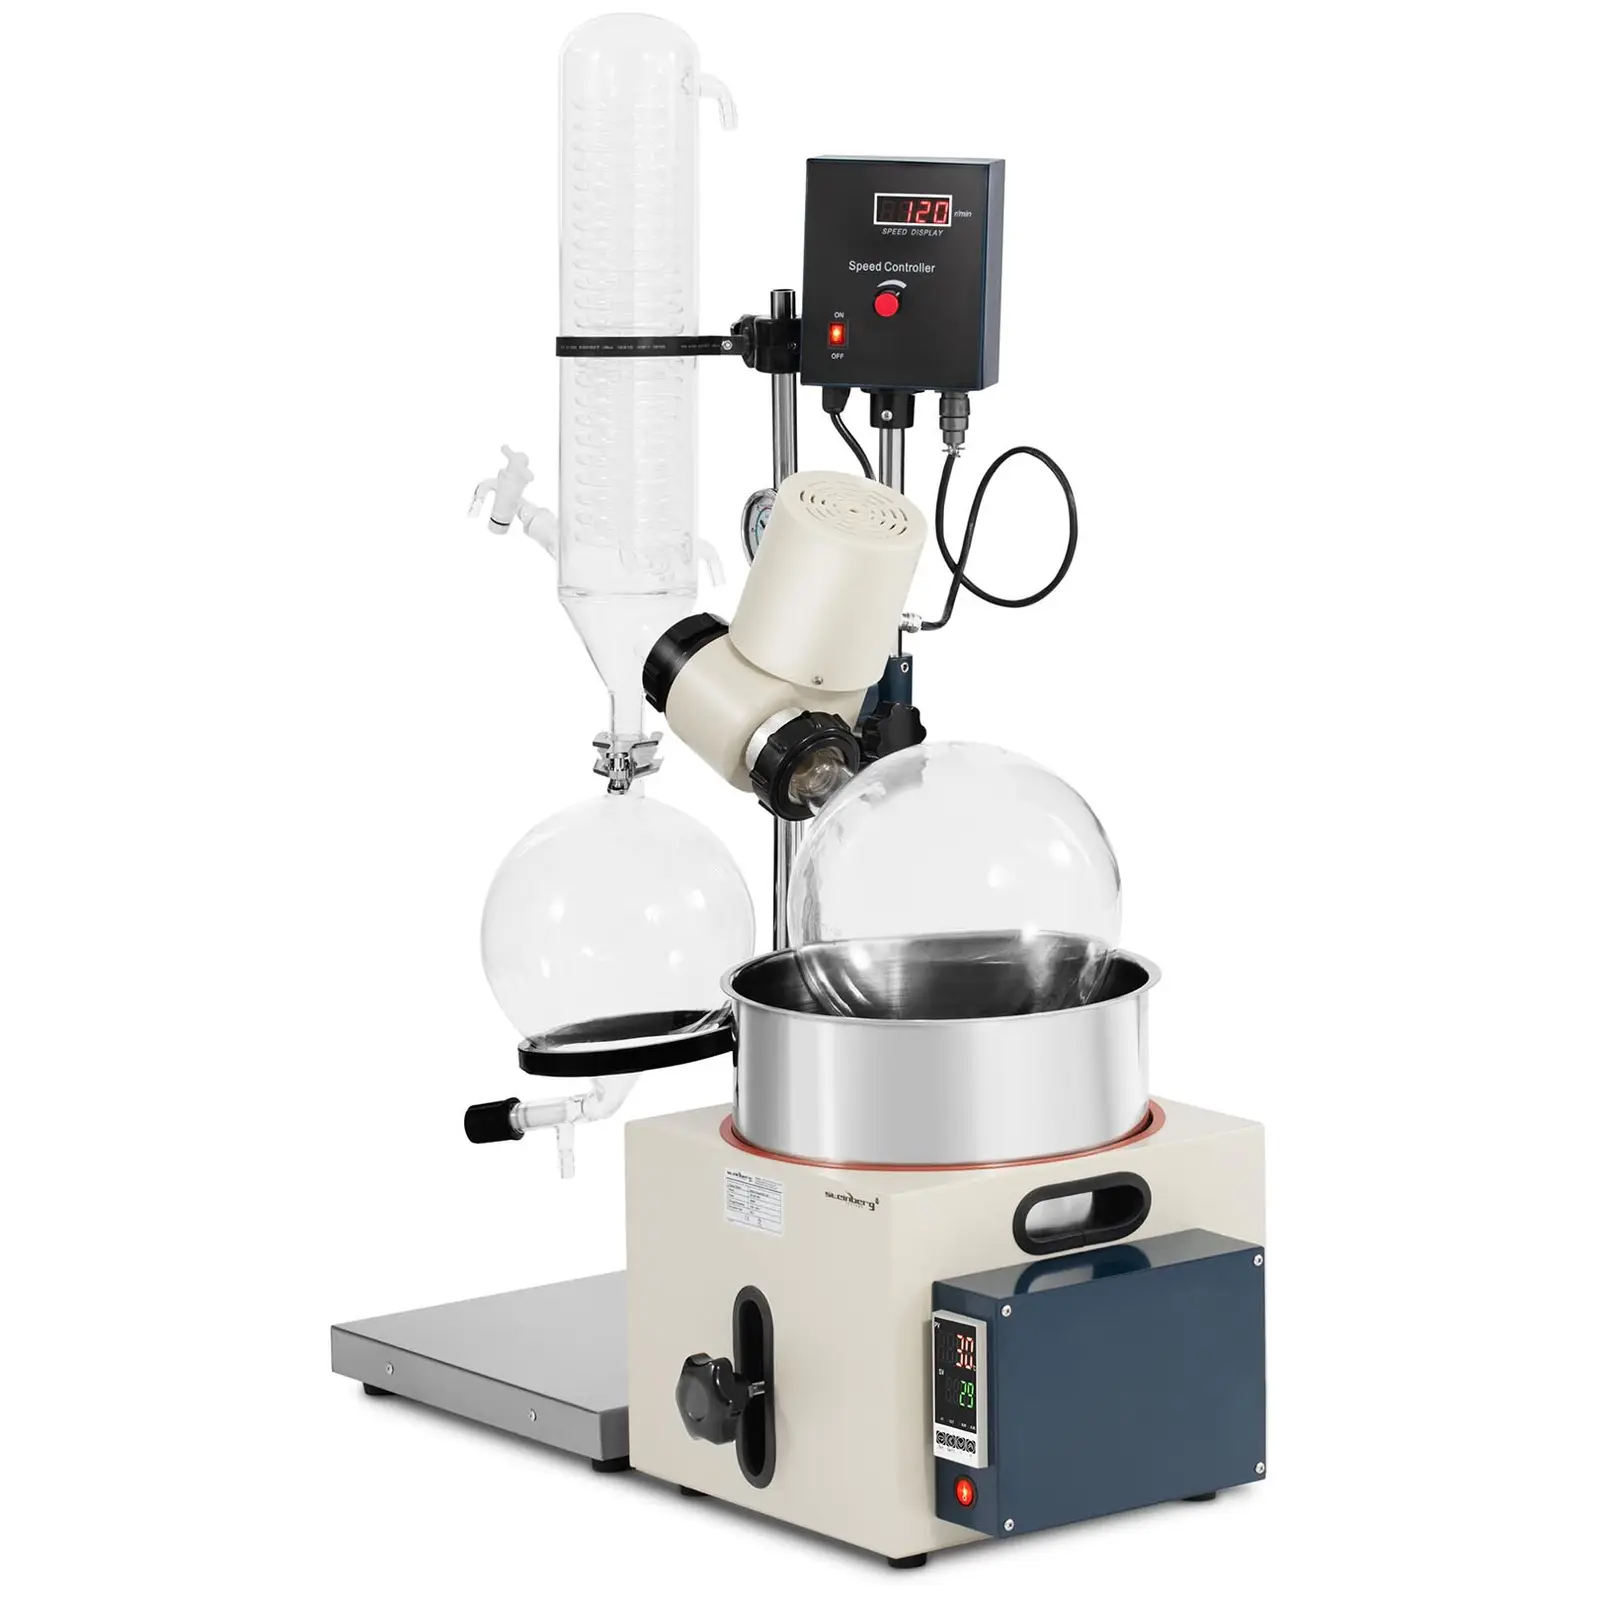 Rotary Evaporator - 2 L collecting flask